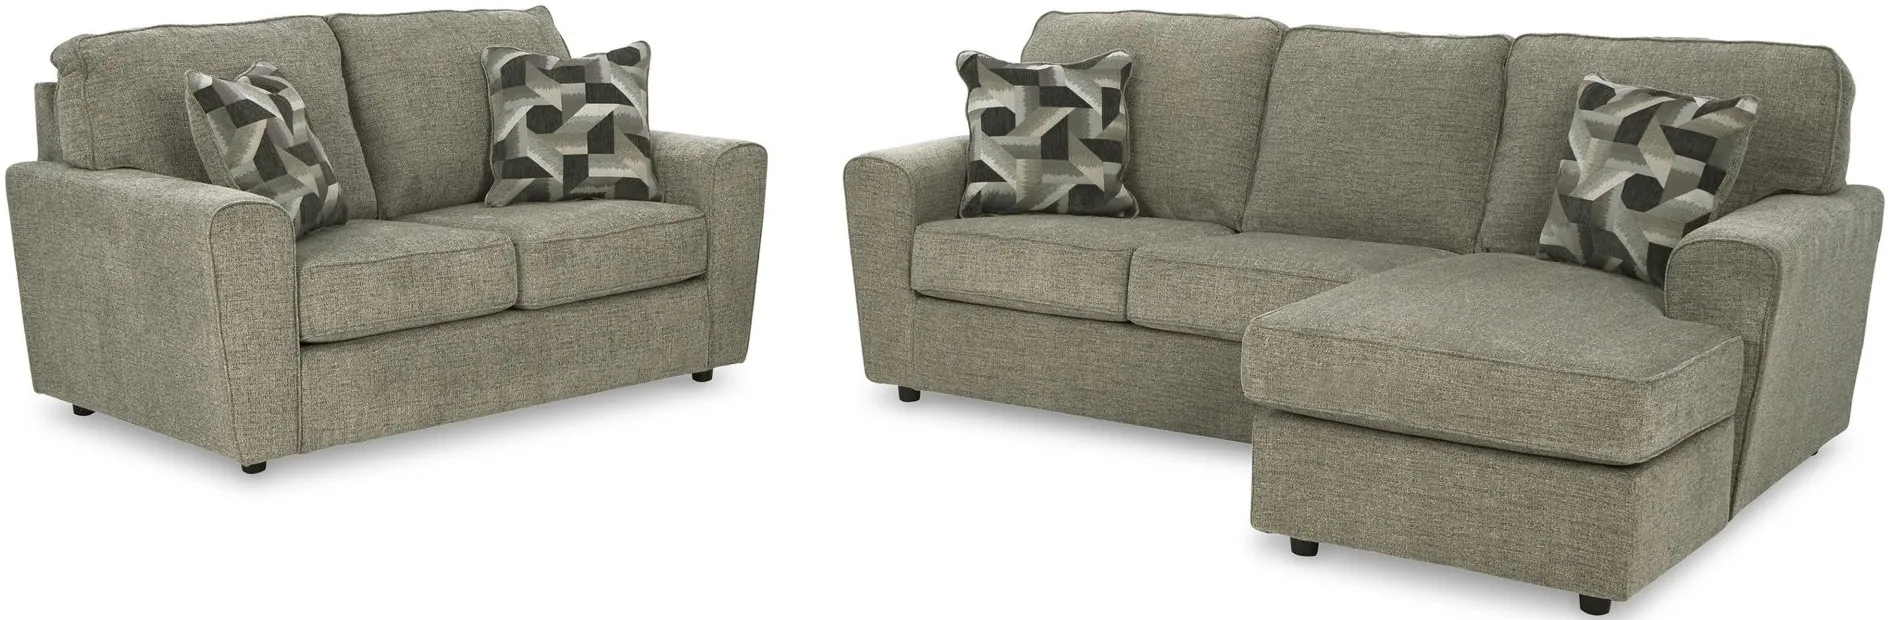 Cascilla Sofa Chaise and Loveseat in Pewter by Ashley Furniture